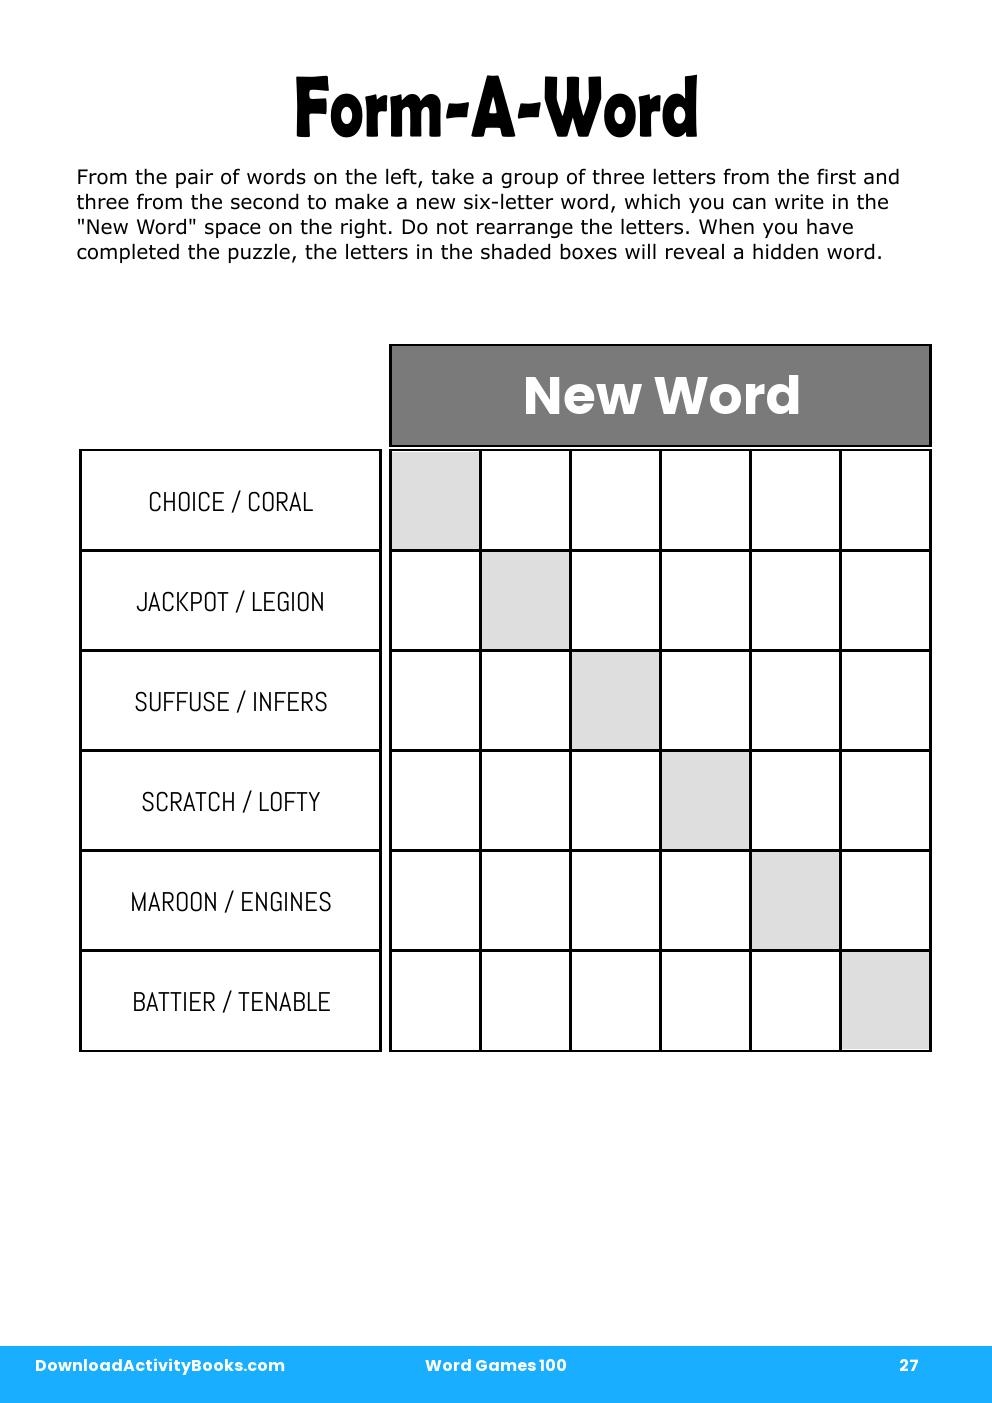 Form-A-Word in Word Games 100